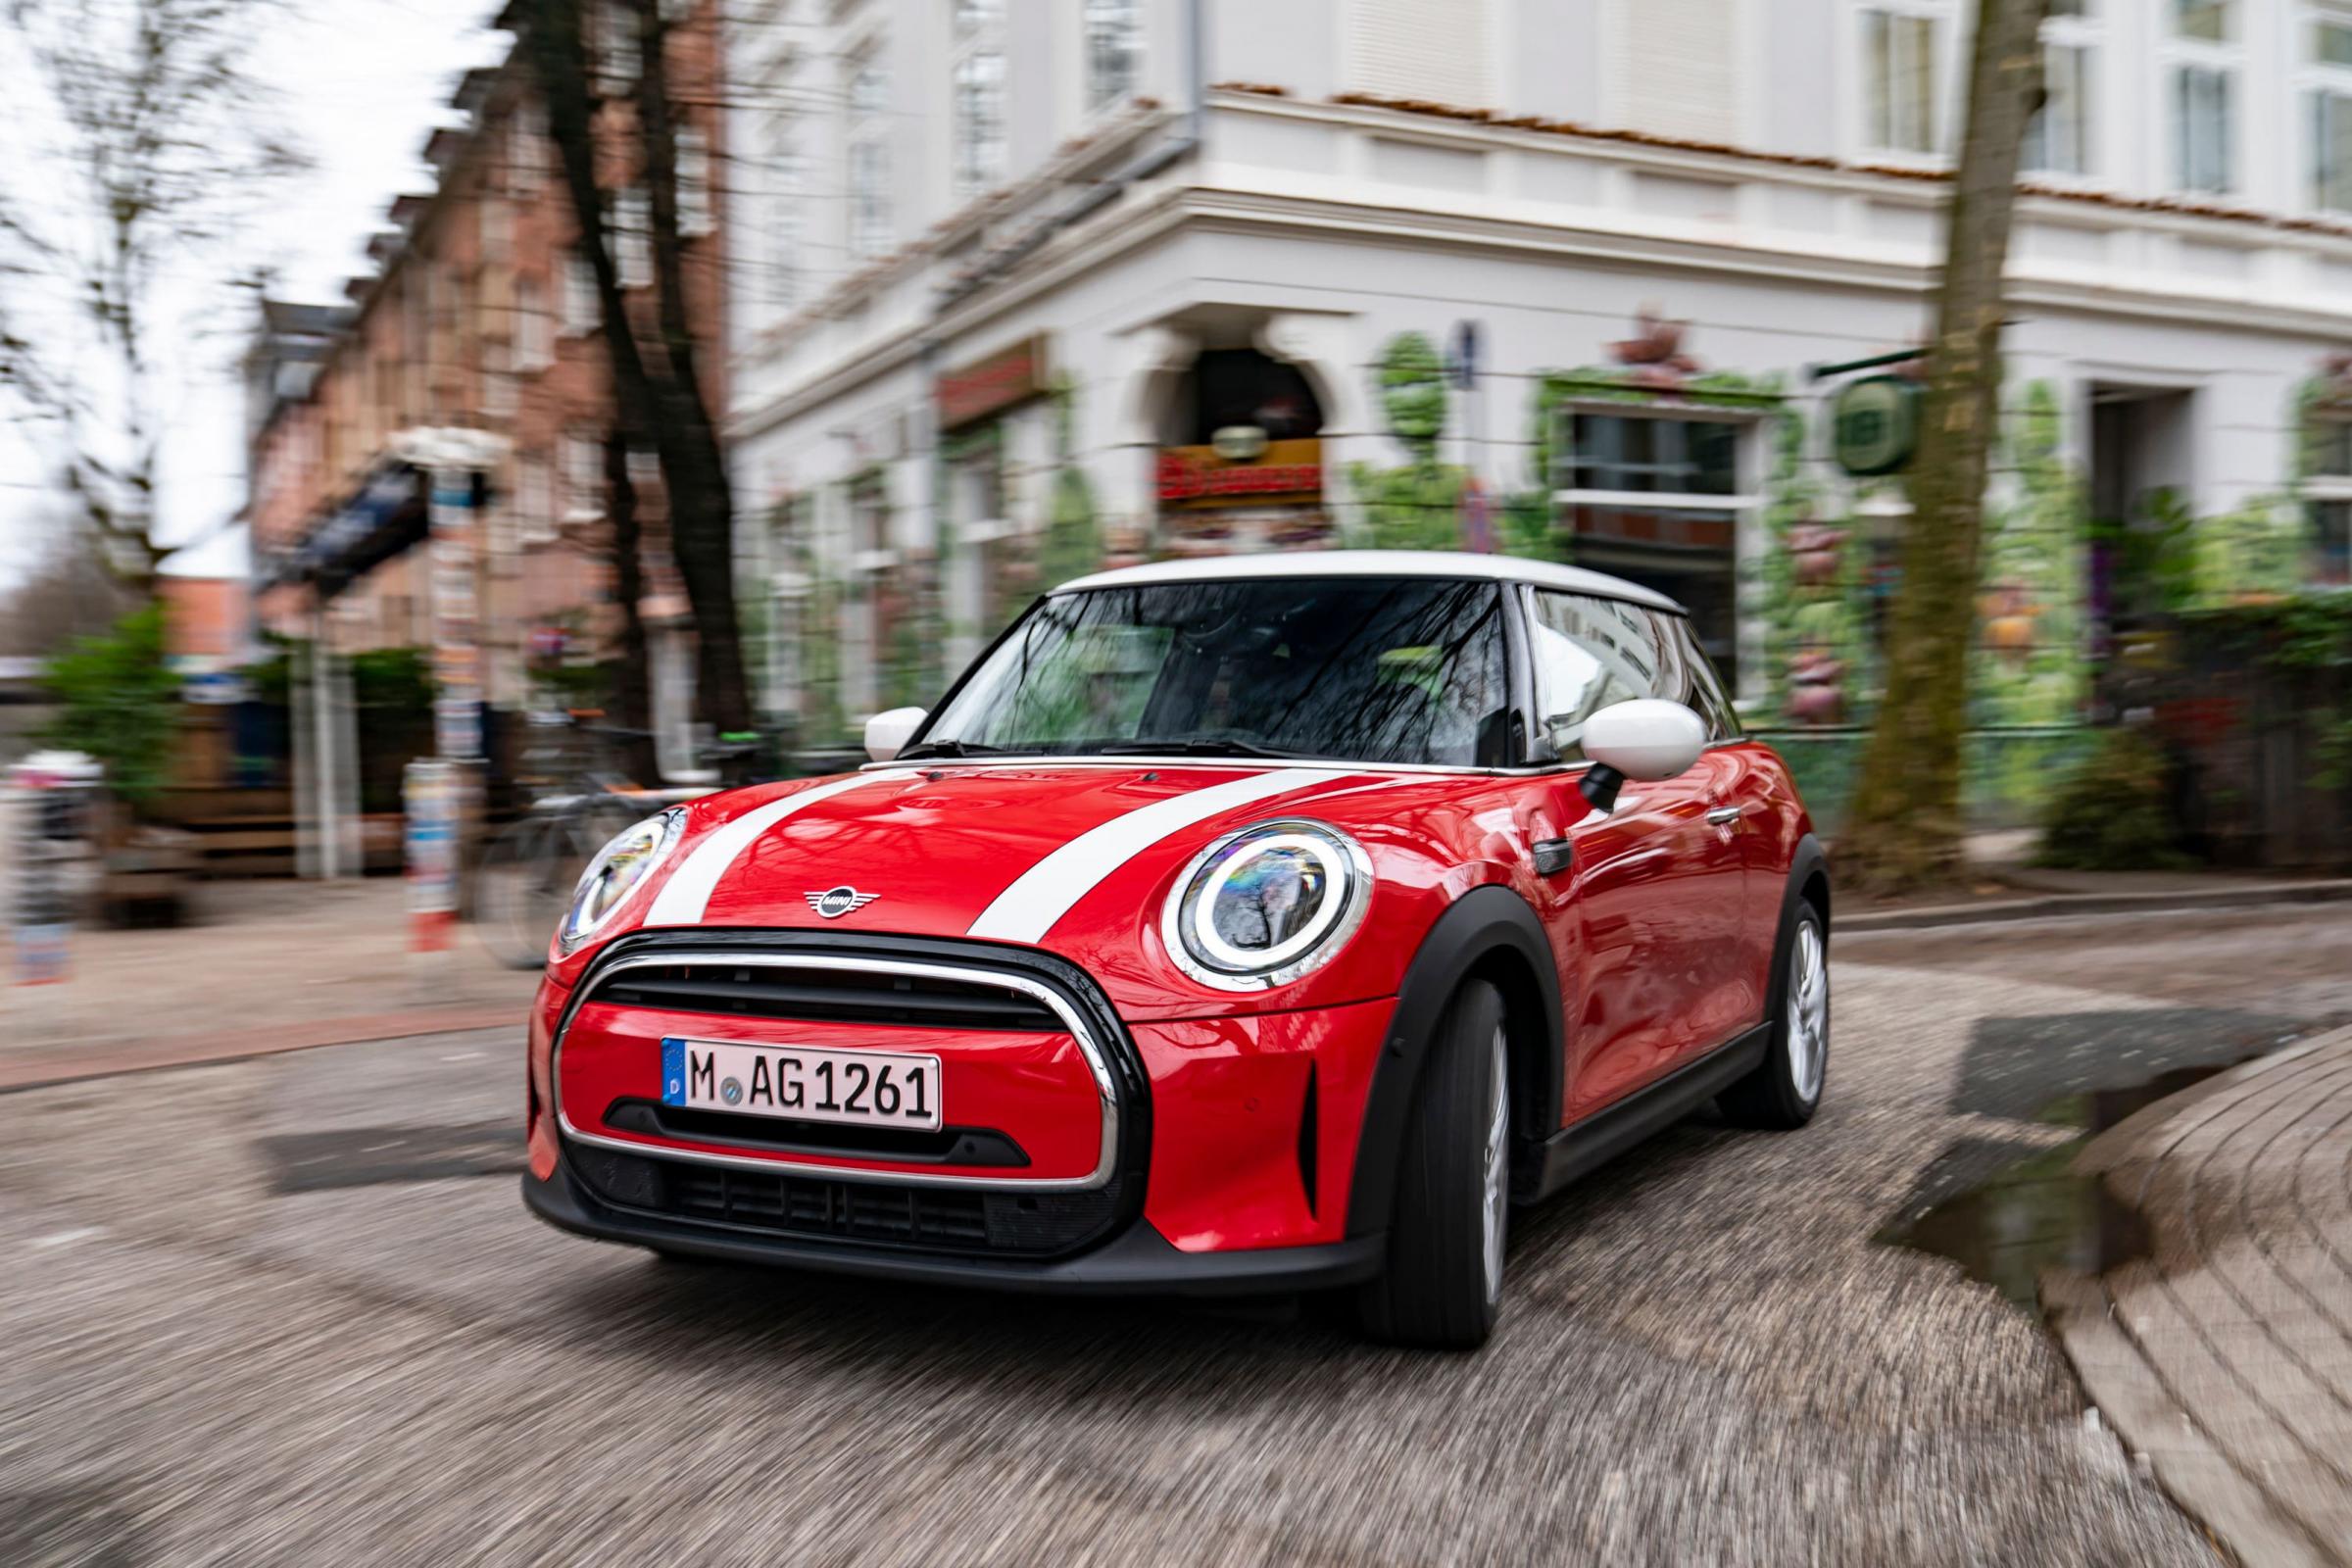 The 'new' Mini celebrates 20 years – here's the best bits